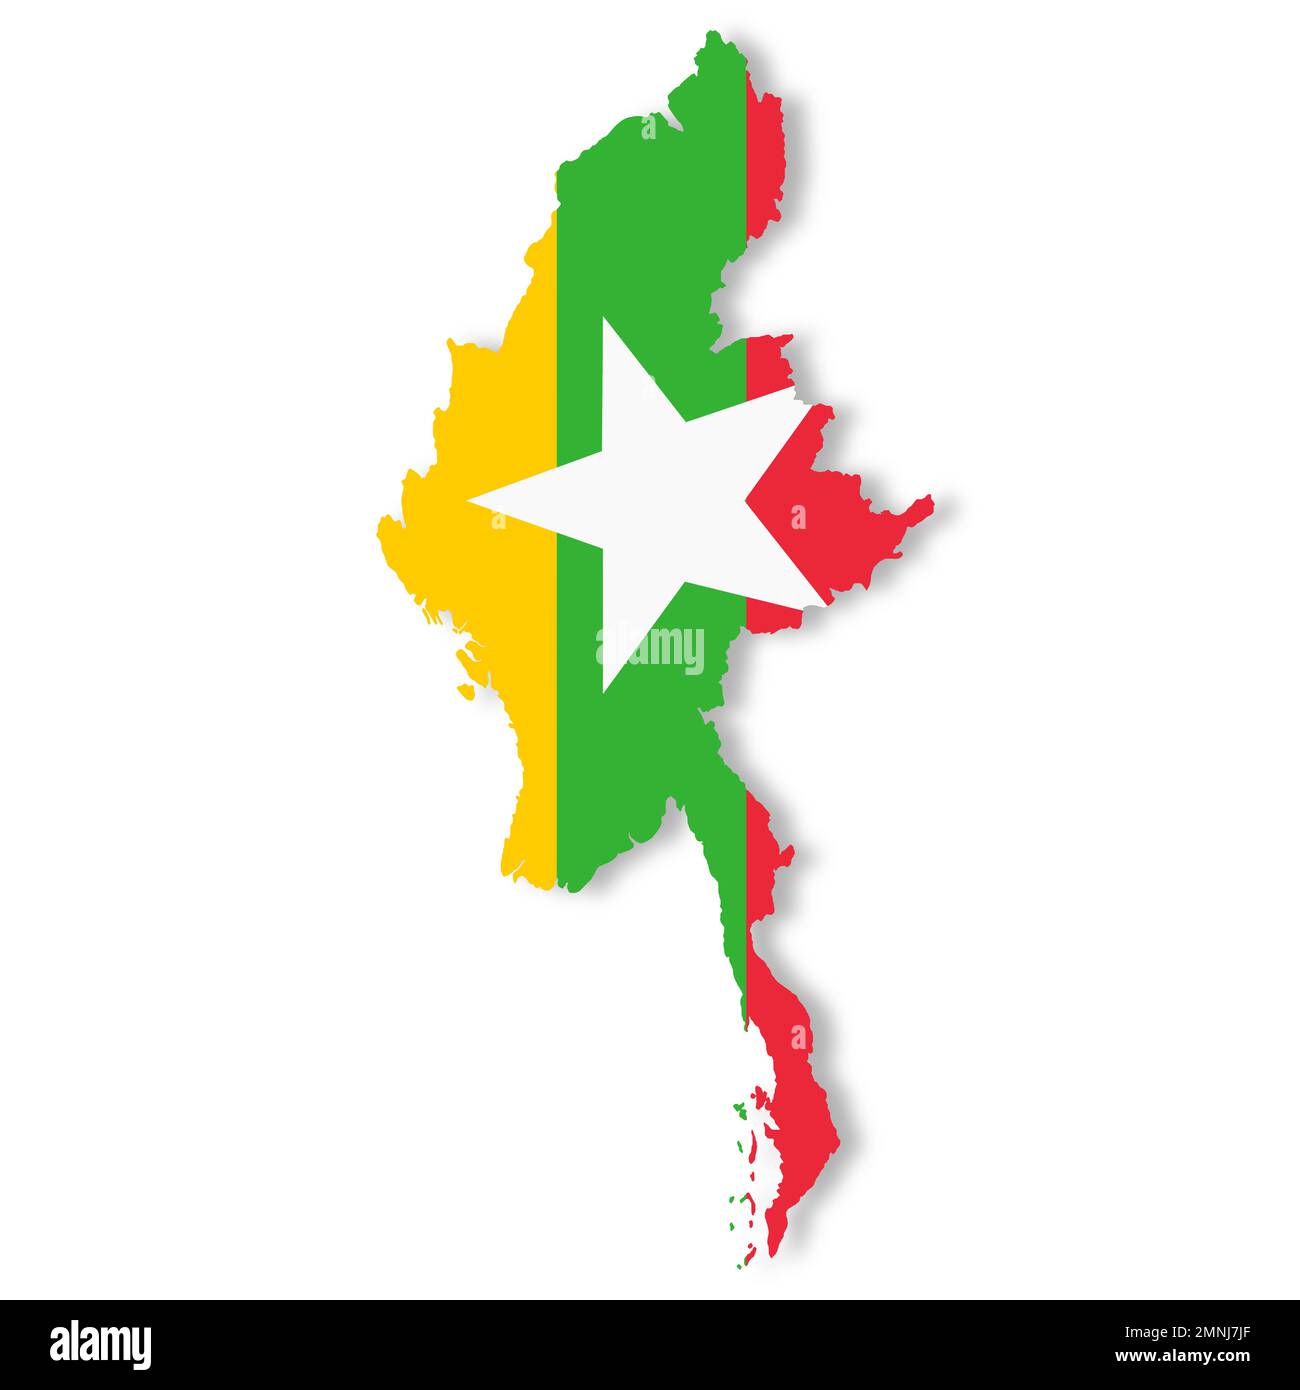 Myanmar flag map with clipping path 3d illustration Stock Photo